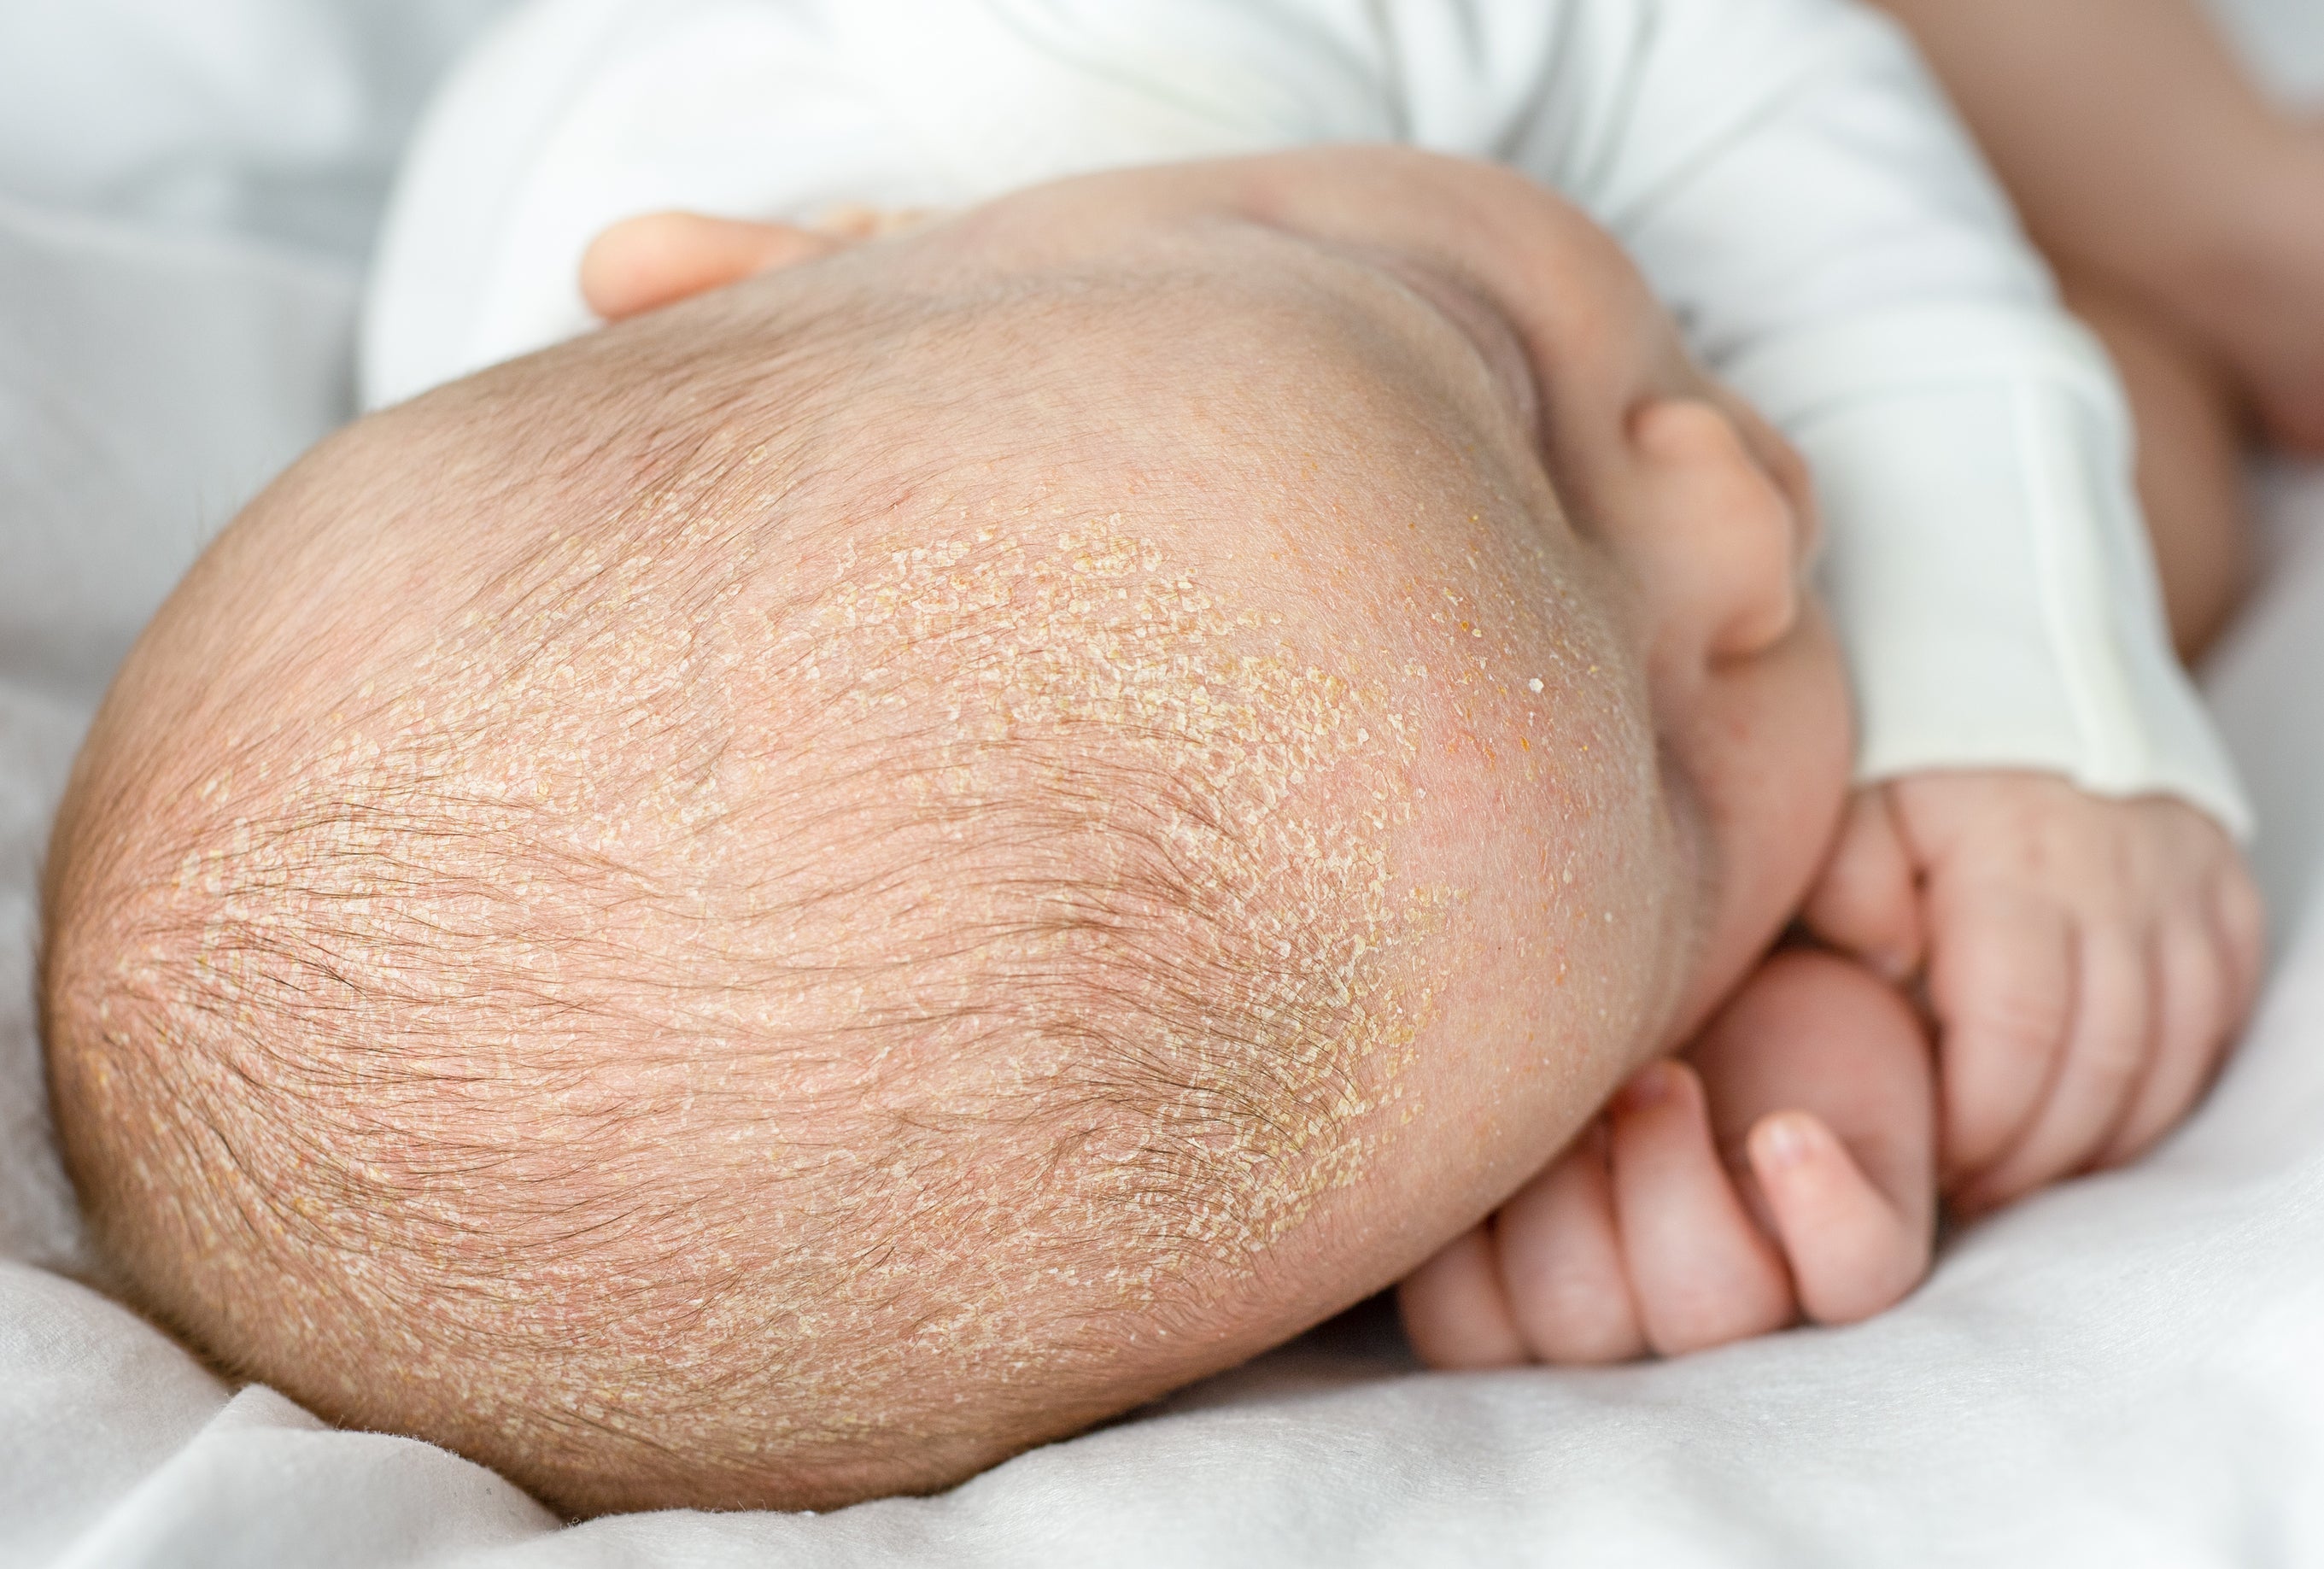 A newborn baby with cradle cap lying on a bed. Coconut oil can help loosen cradle cap flakes.